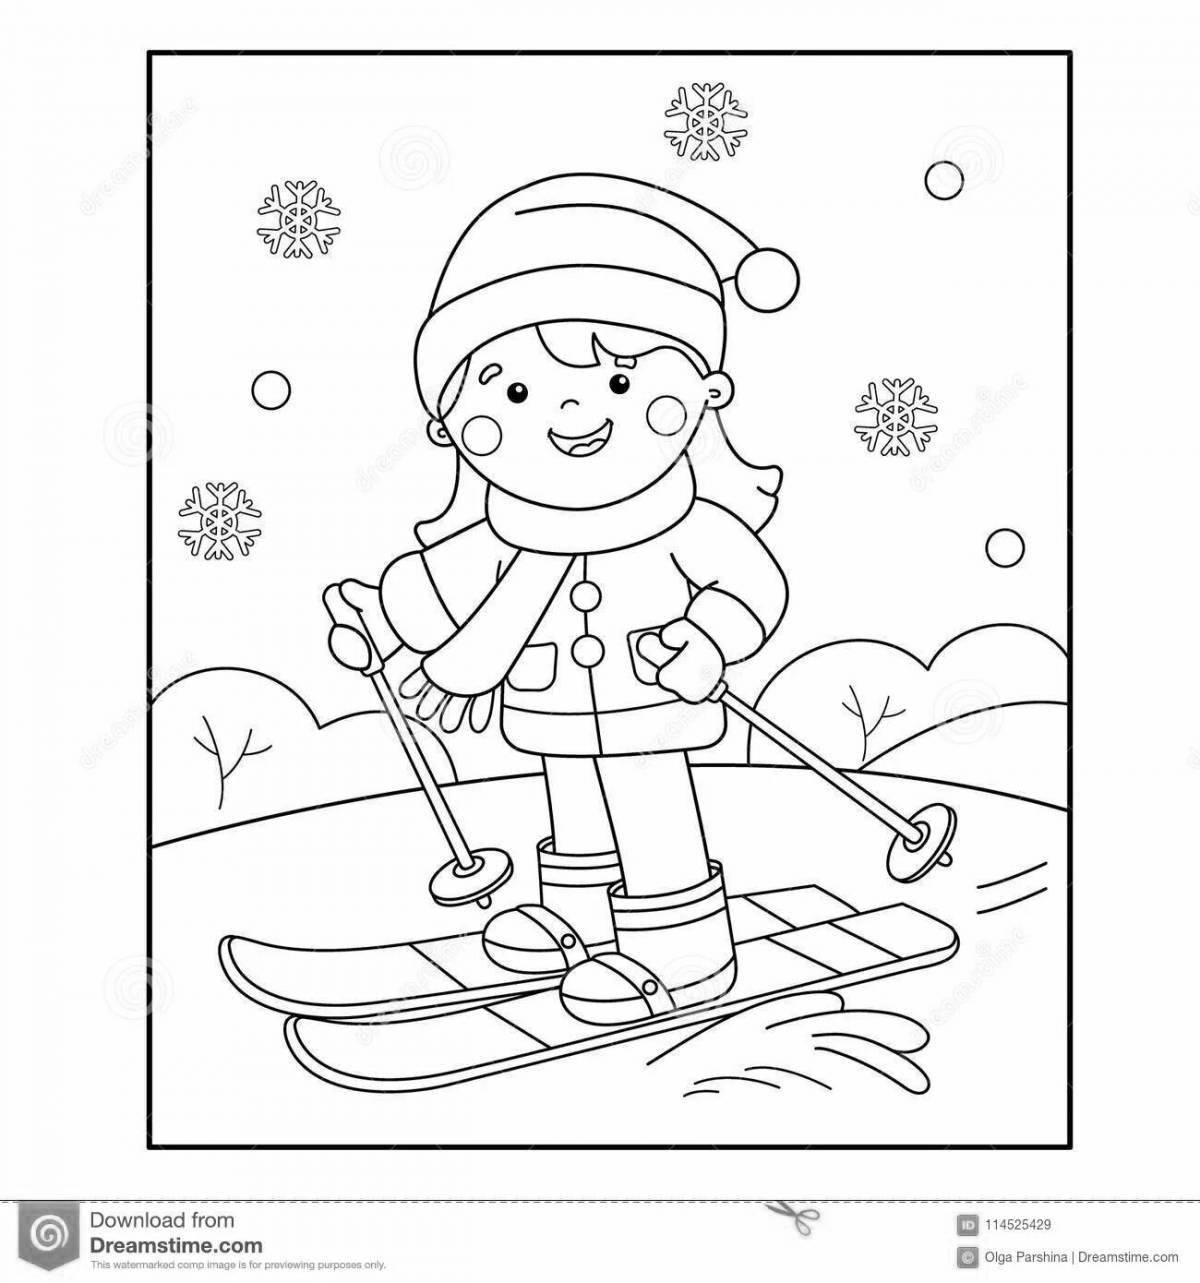 Adorable winter sports coloring page for kids